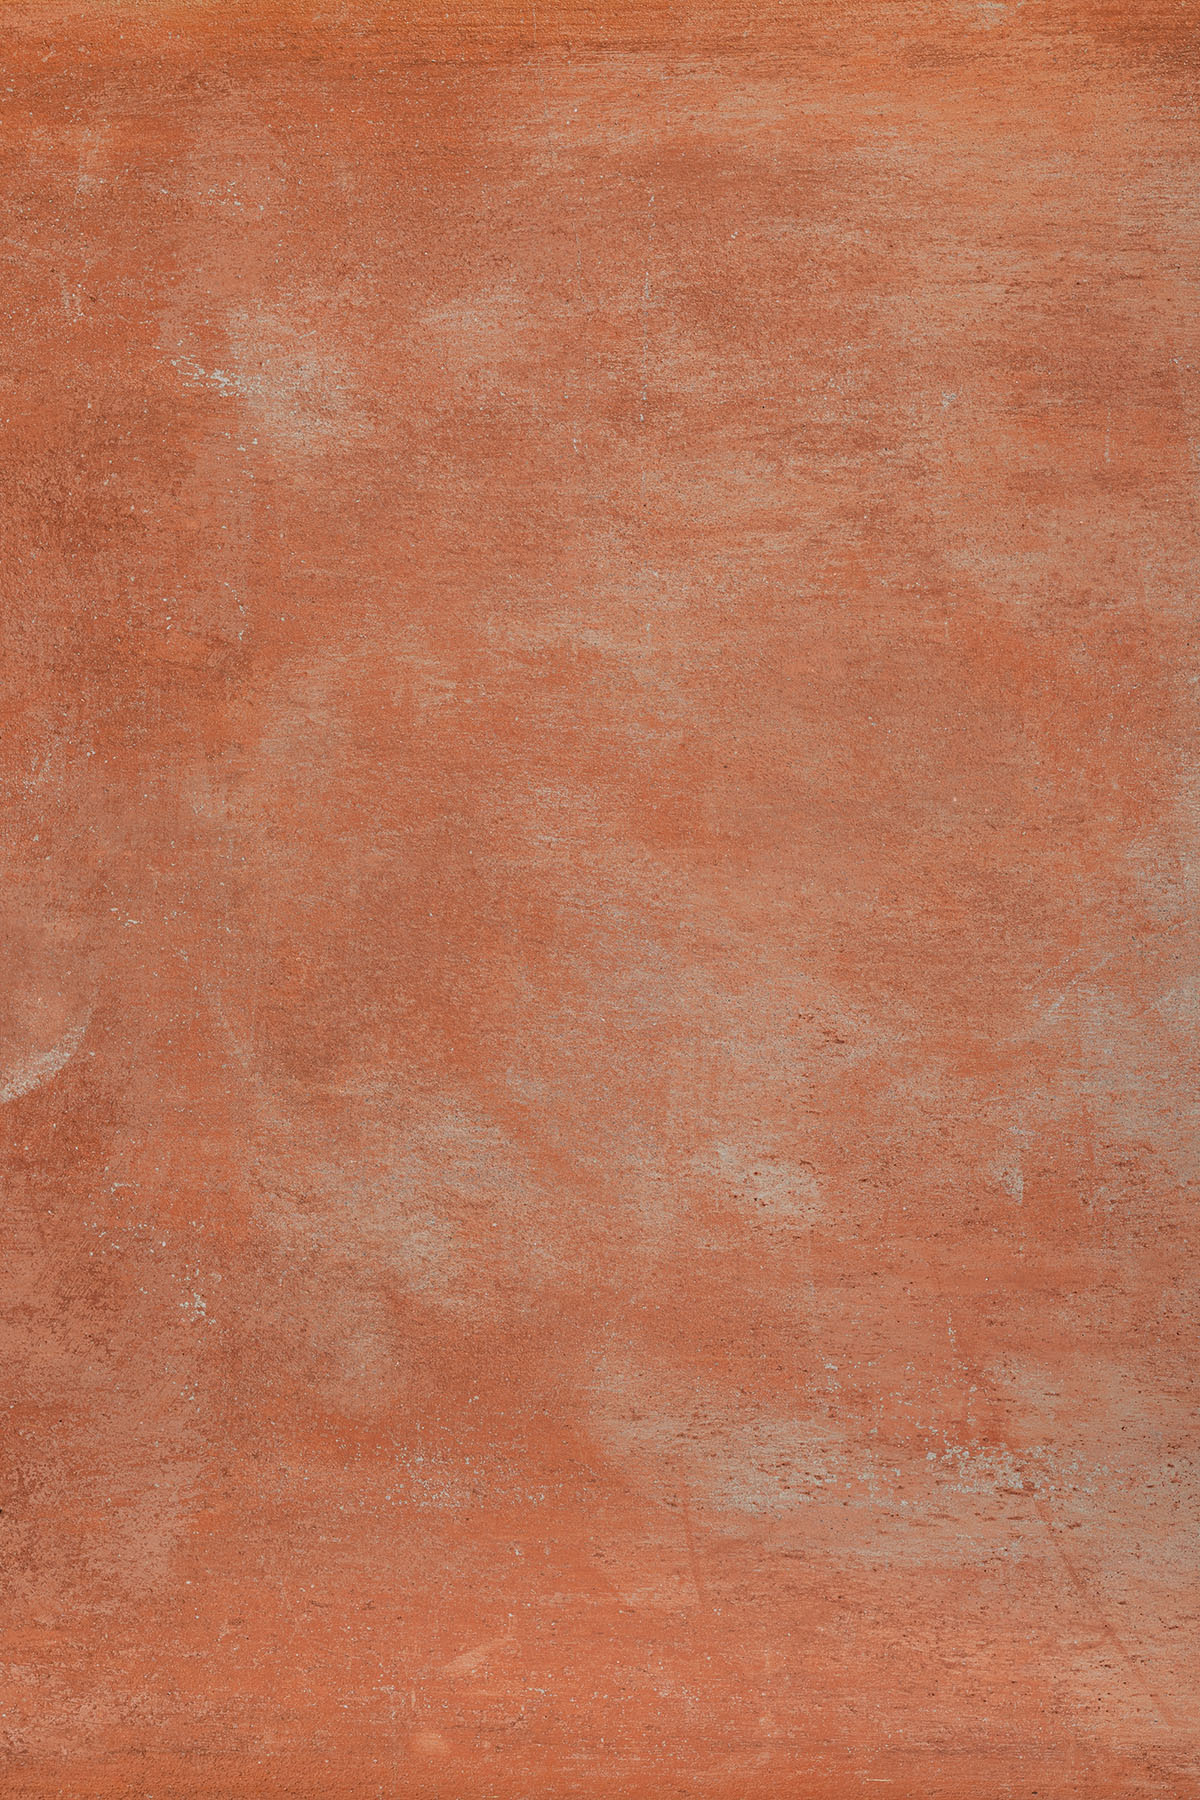 Terracotta concrete background for food & product photography